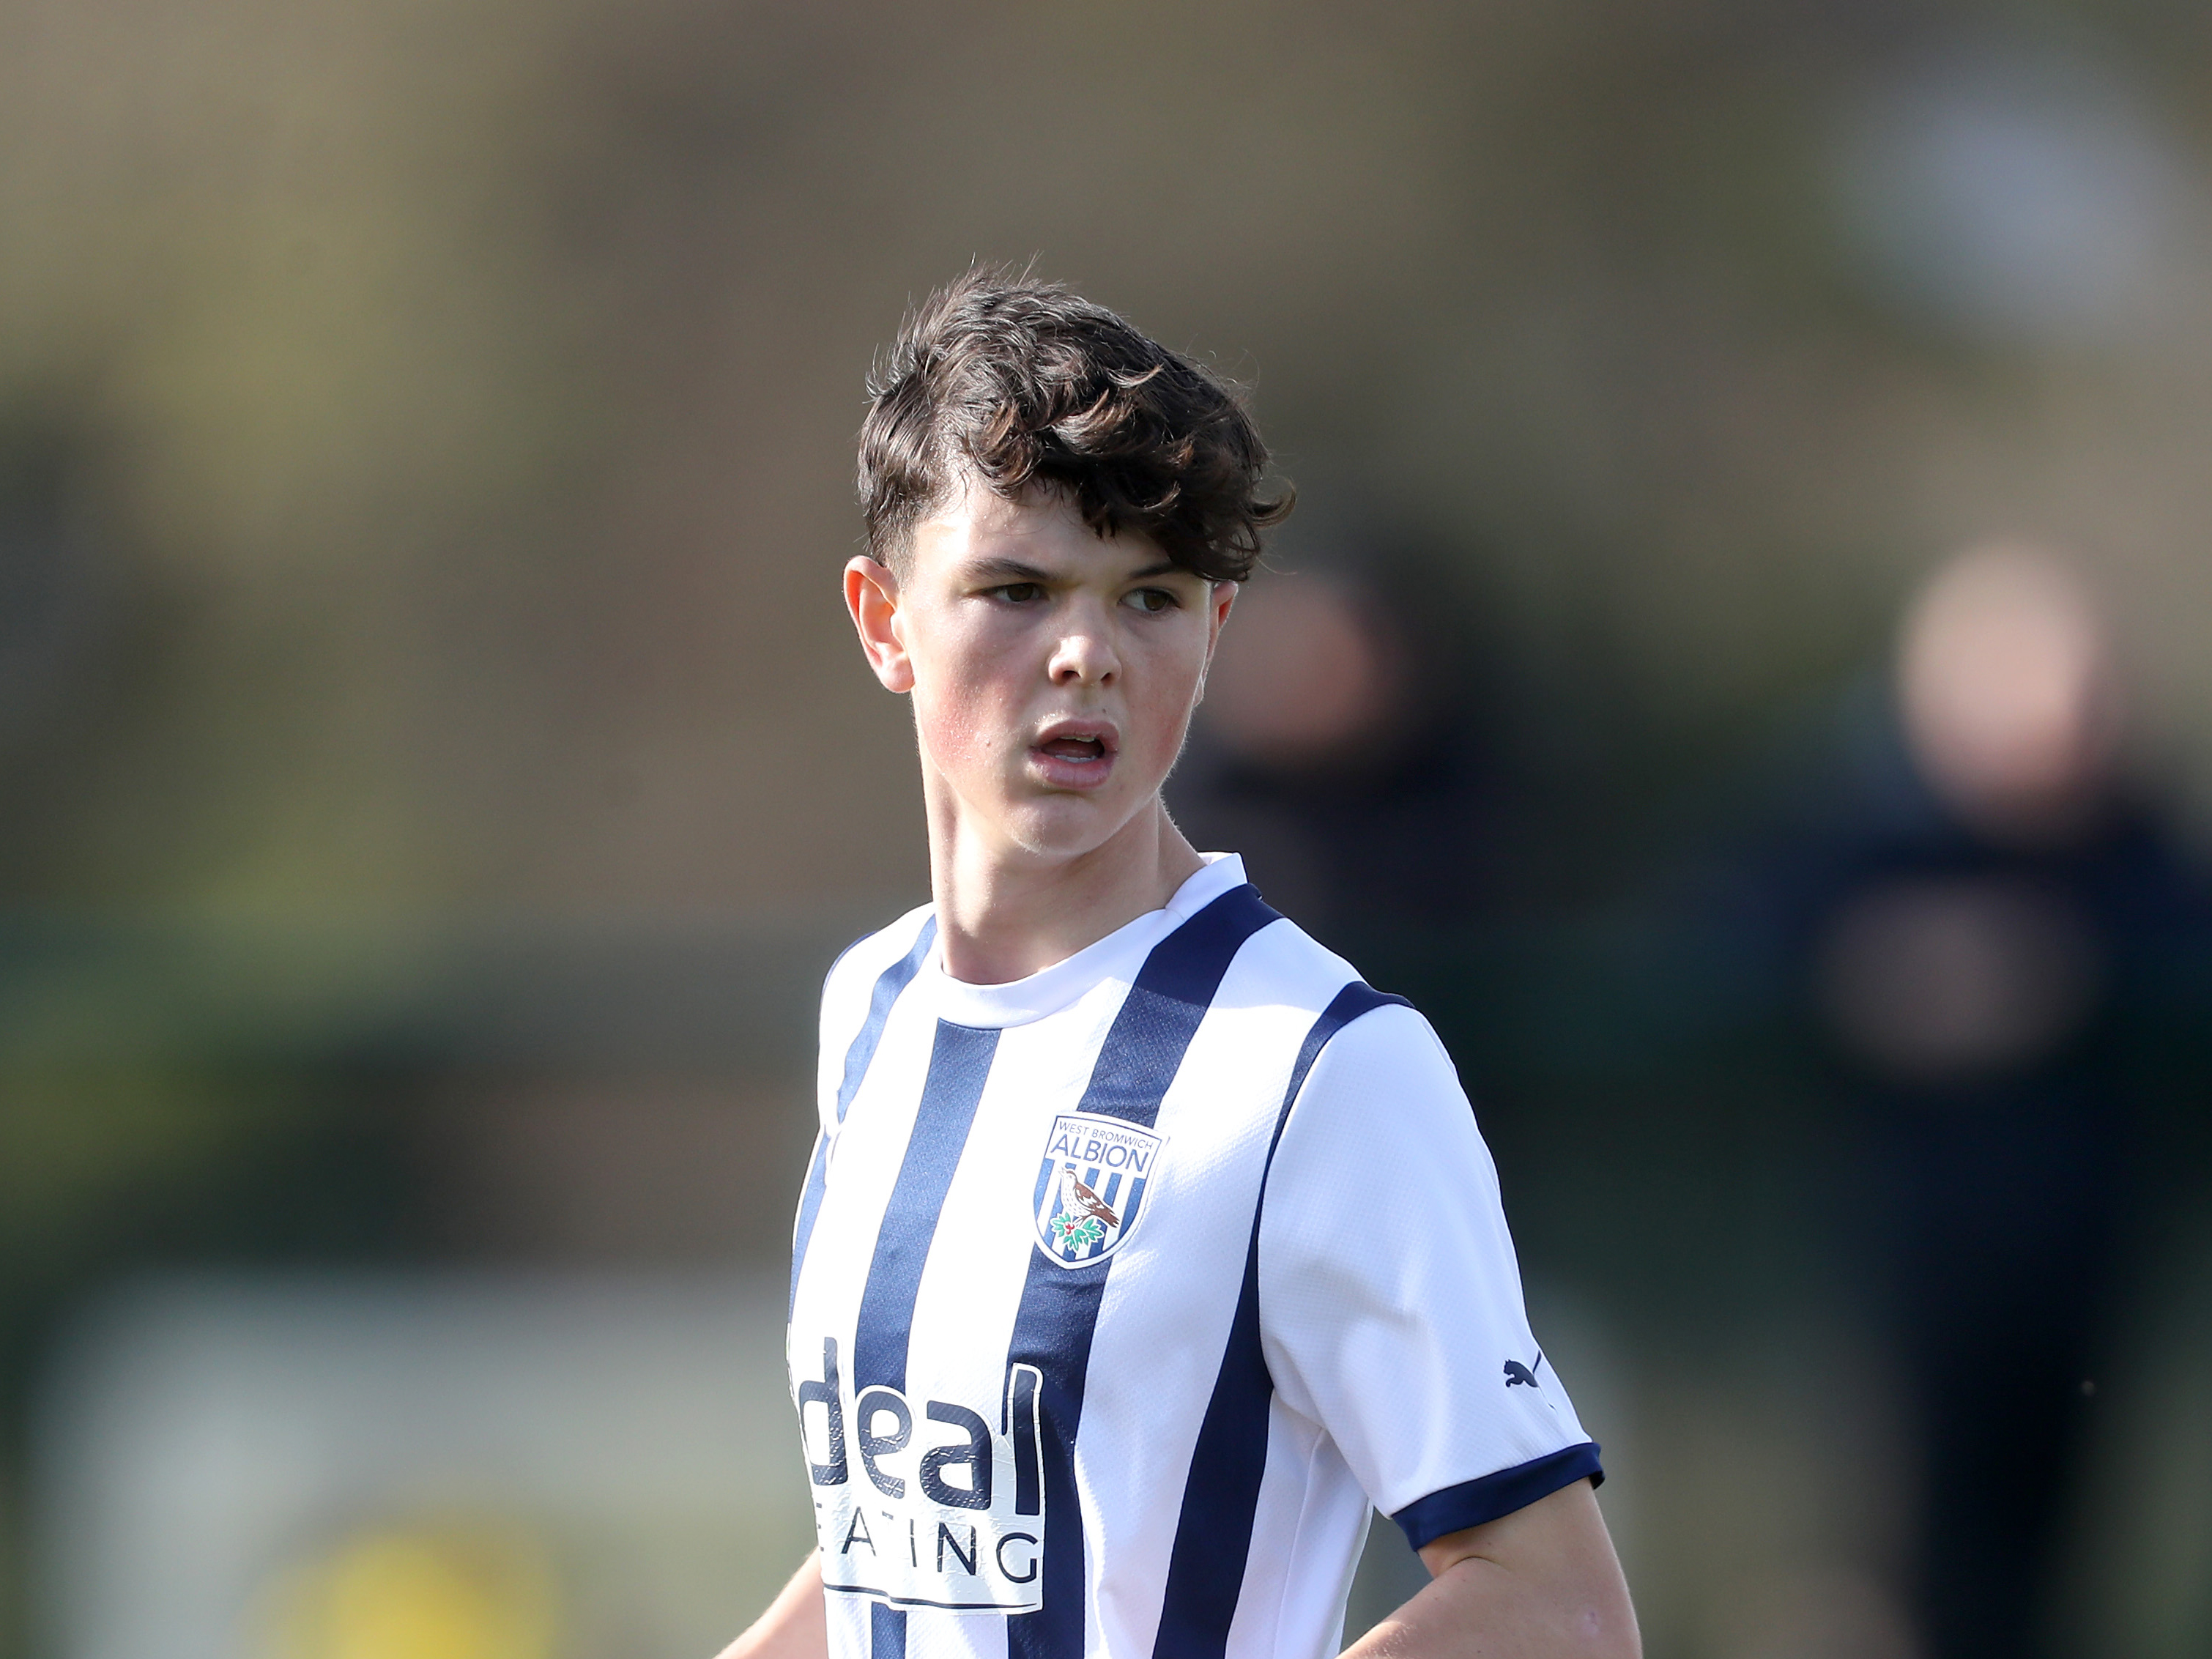 Max Jenner in action for Albion's U18 side